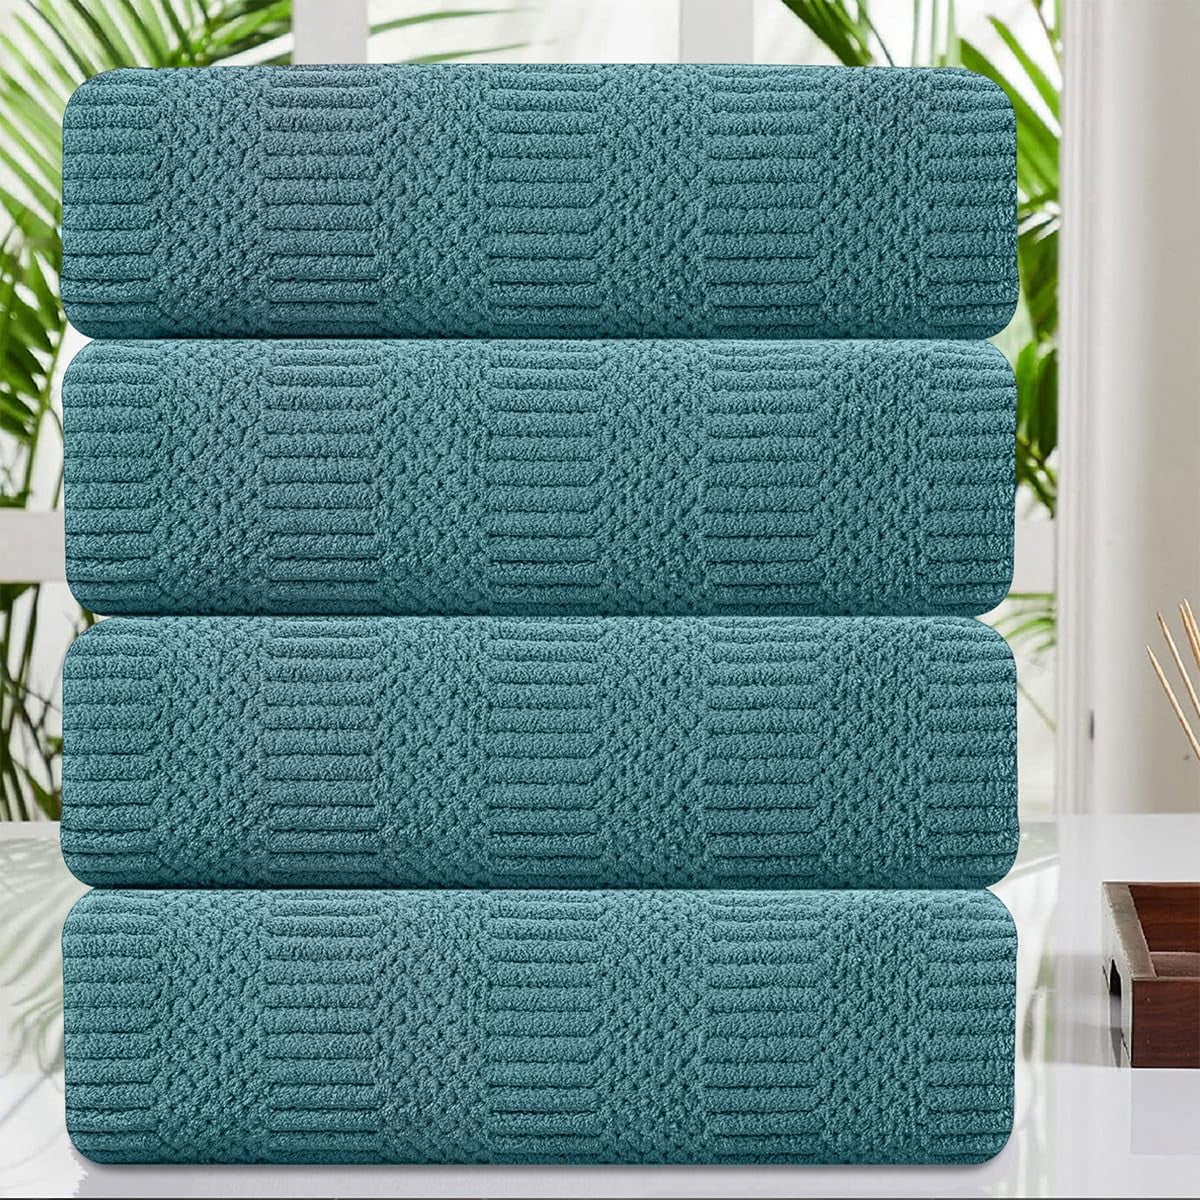 Cotton Craft Ultra Soft 4 Pack Oversized Extra Large Bath Towels 30x54 Teal  22 - for sale online